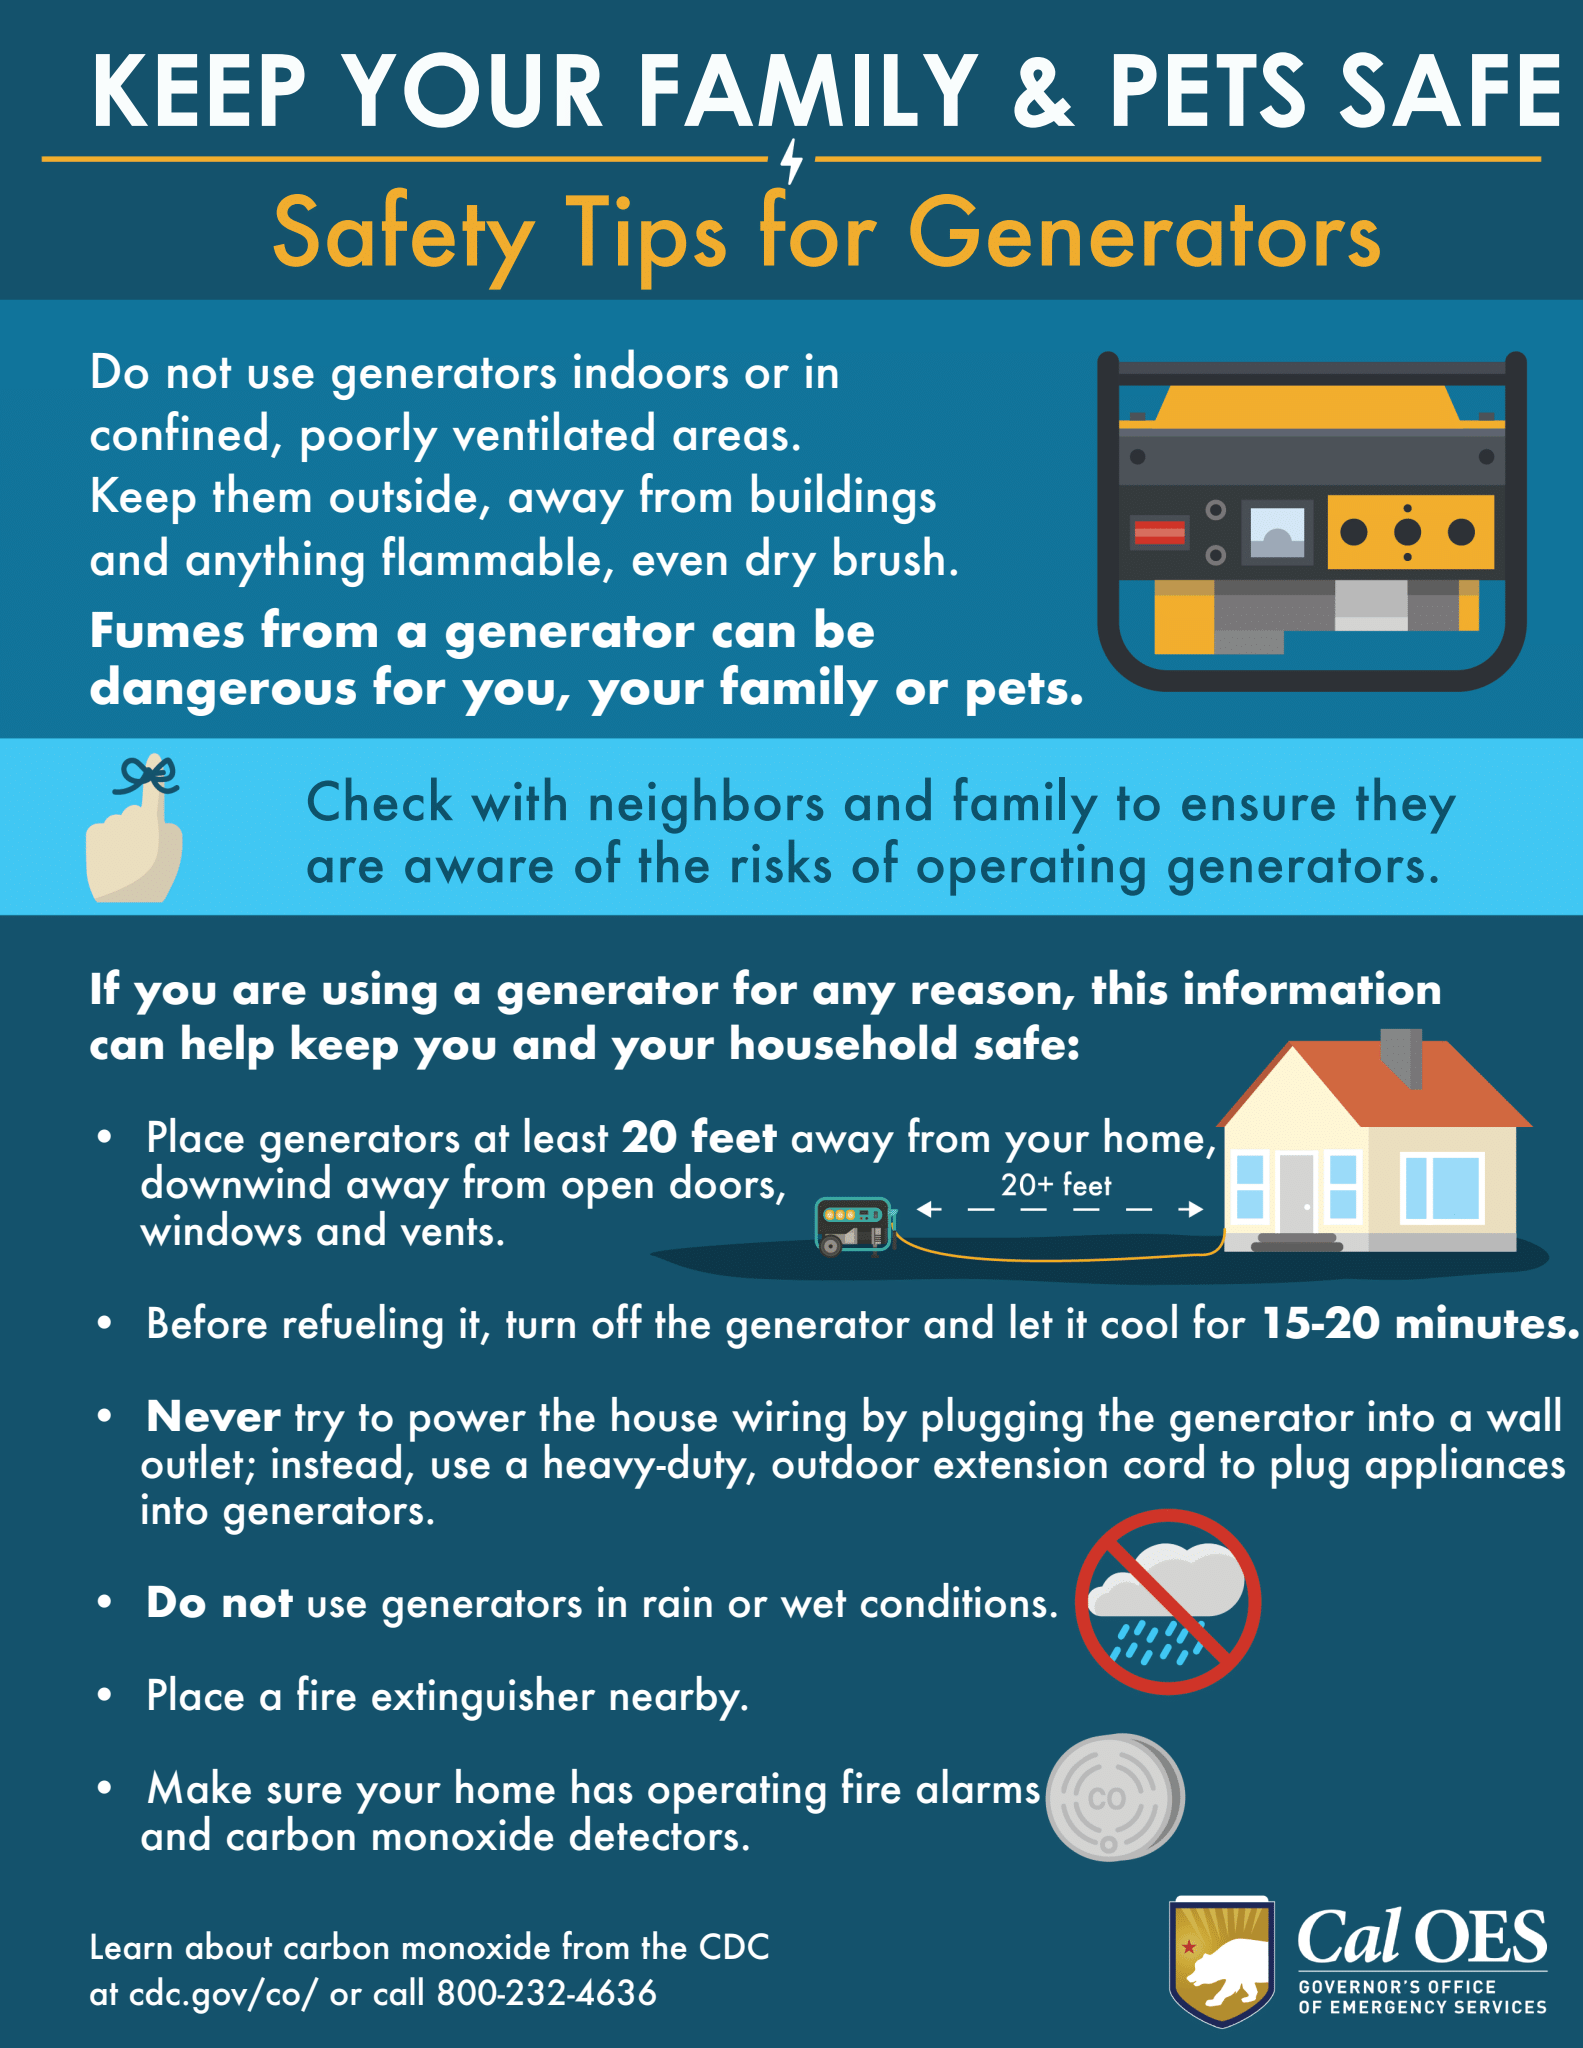 Keep your family and pets safe Safety tips for generators Safety Tips for Generators Do not use generators indoors or in confined, poorly ventilated areas. Keep them outside, away from buildings and anything flammable, even dry brush. Fumes from a generator can be dangerous for you, your family or pets. Check with neighbors and family to ensure they are aware of the risks of operating generators. If you are using a generator for any reason, this information can help keep you and your household safe: Place generators at least 20 feet away from your home, downwind away from open doors, windows and vents. Before refueling it, turn off the generator and let it cool for 15-20 minutes. Never try to power the house wiring by plugging the generator into a wall outlet; instead, use a heavy-duty, outdoor extension cord to plug appliances into generators. Do not use generators in rain or wet conditions. Place a fire extinguisher nearby. Make sure your home has operating fire alarms and carbon monoxide detectors. Learn about carbon monoxide from the CDC at cdc.gov/co/ or call 800-232-4636 Cal OES GOVERNOR'S OFFICE OF EMERGENCY SERVICES